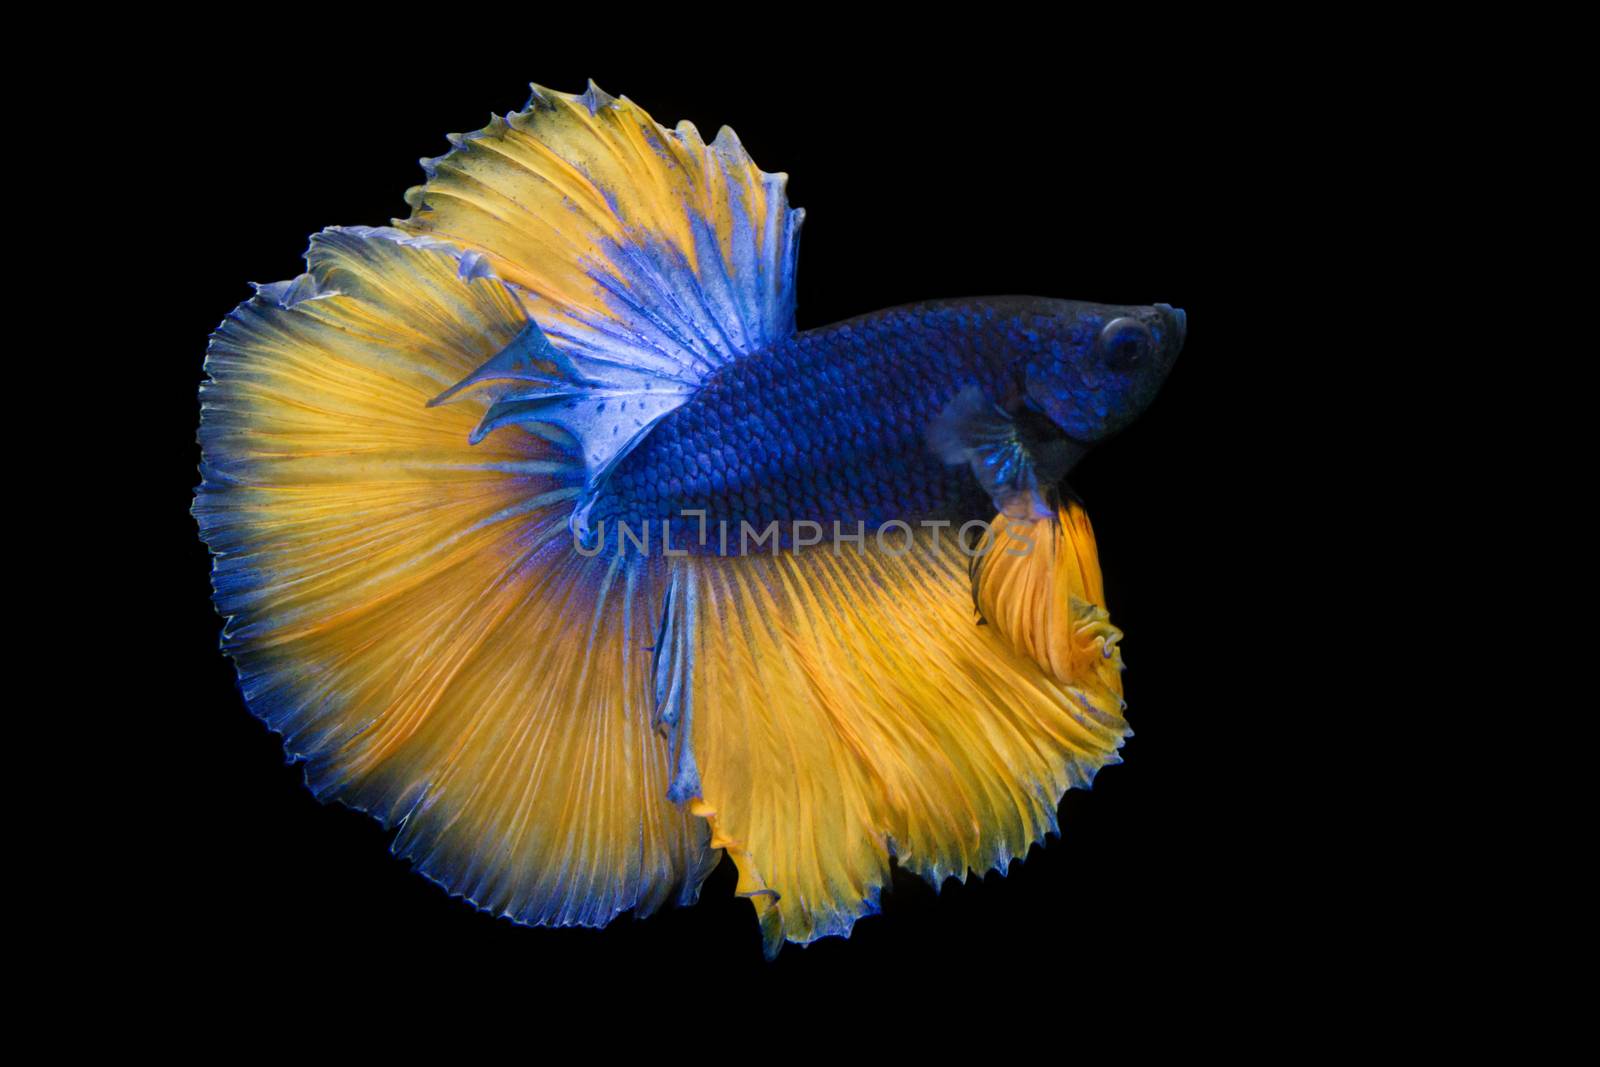 Image Of Betta Fish Isolated On Black Background, Action Moving Moment Of Mustard Over Half Moon Betta, Siamese Fighting Fish by rakoptonLPN